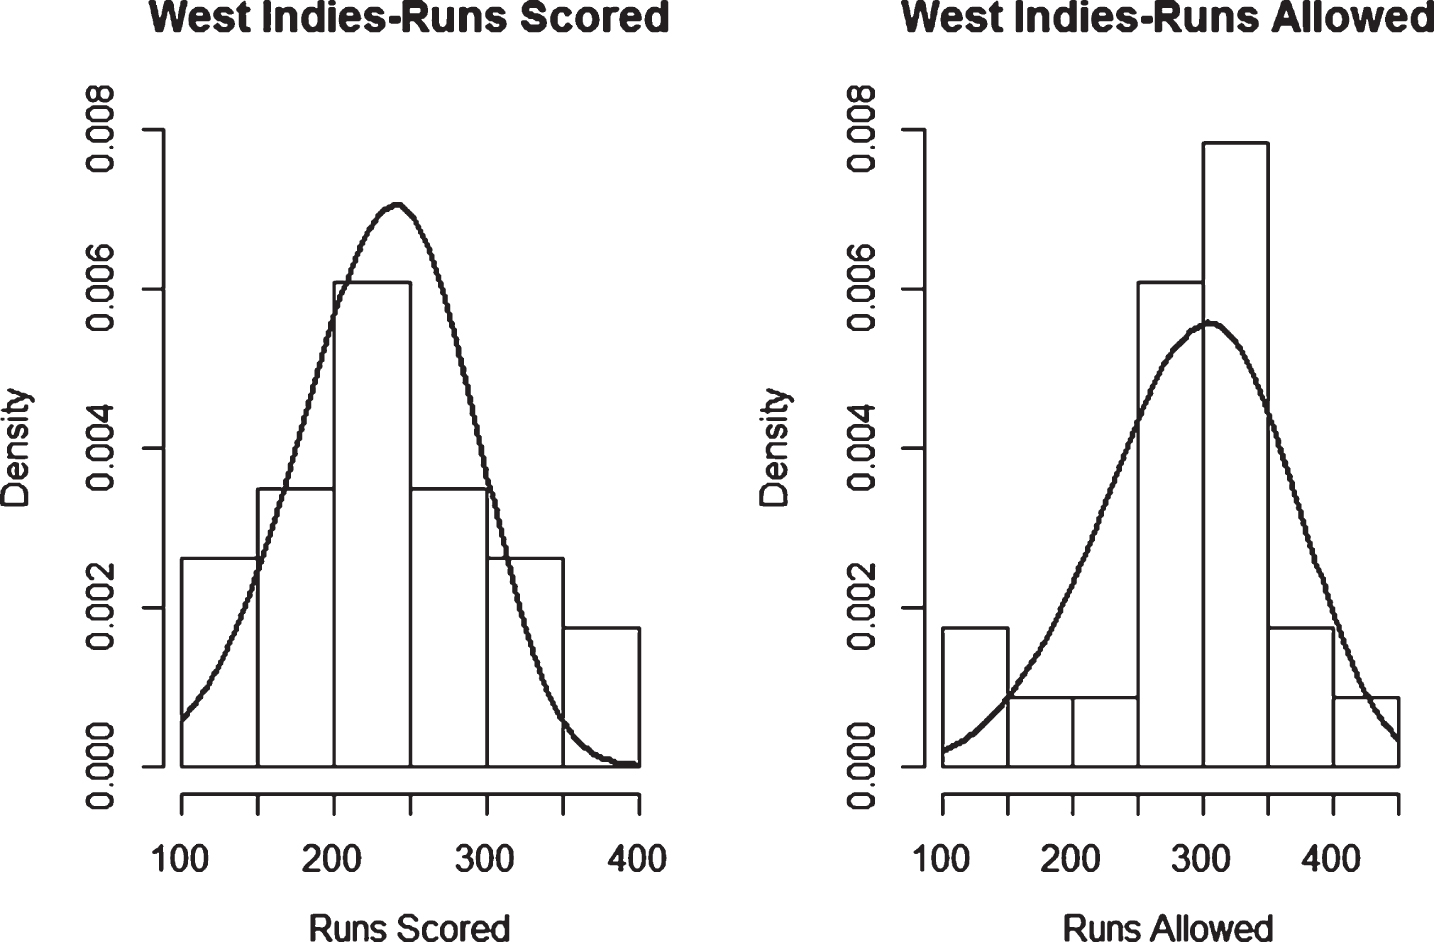 Weibull Distribution Fit for Runs Scored and Runs Allowed for West Indies using Least Squares Method (ODI).